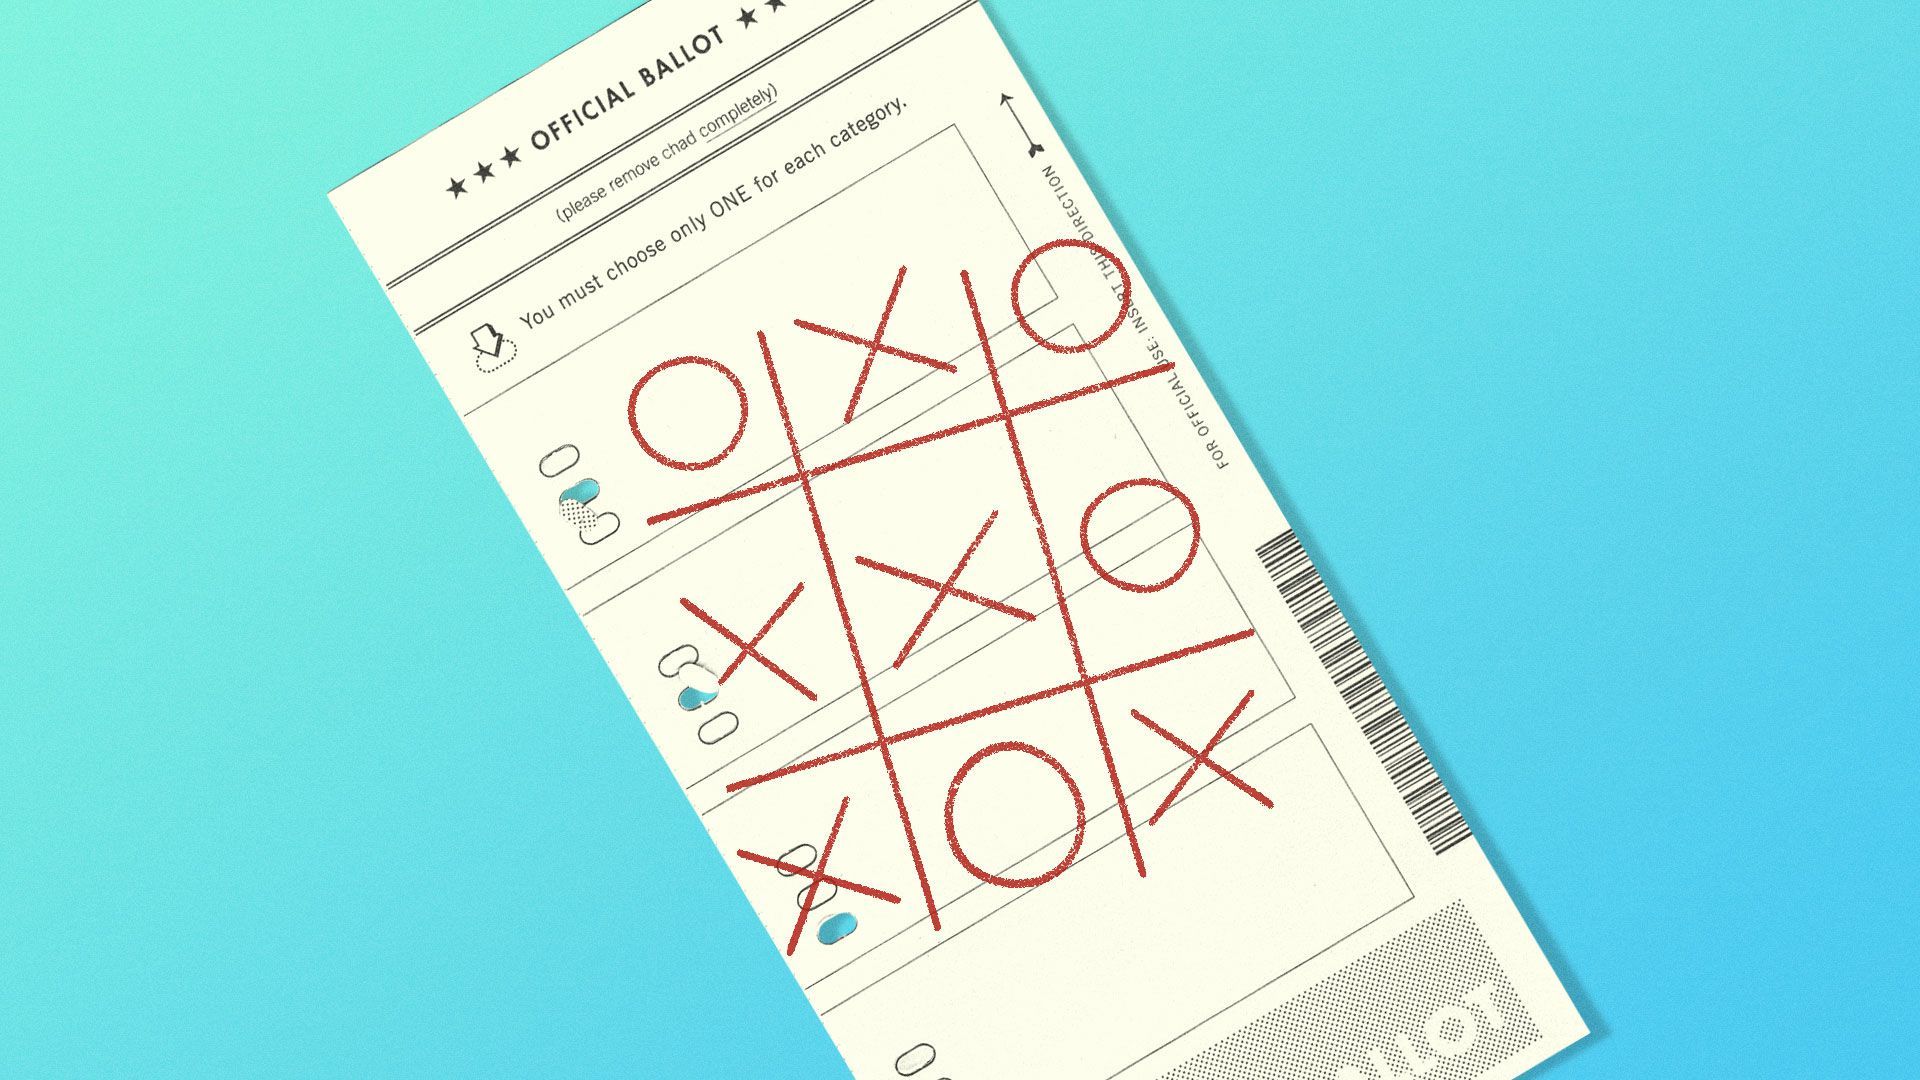 Illustration of ballot with a tic tac toe losing game